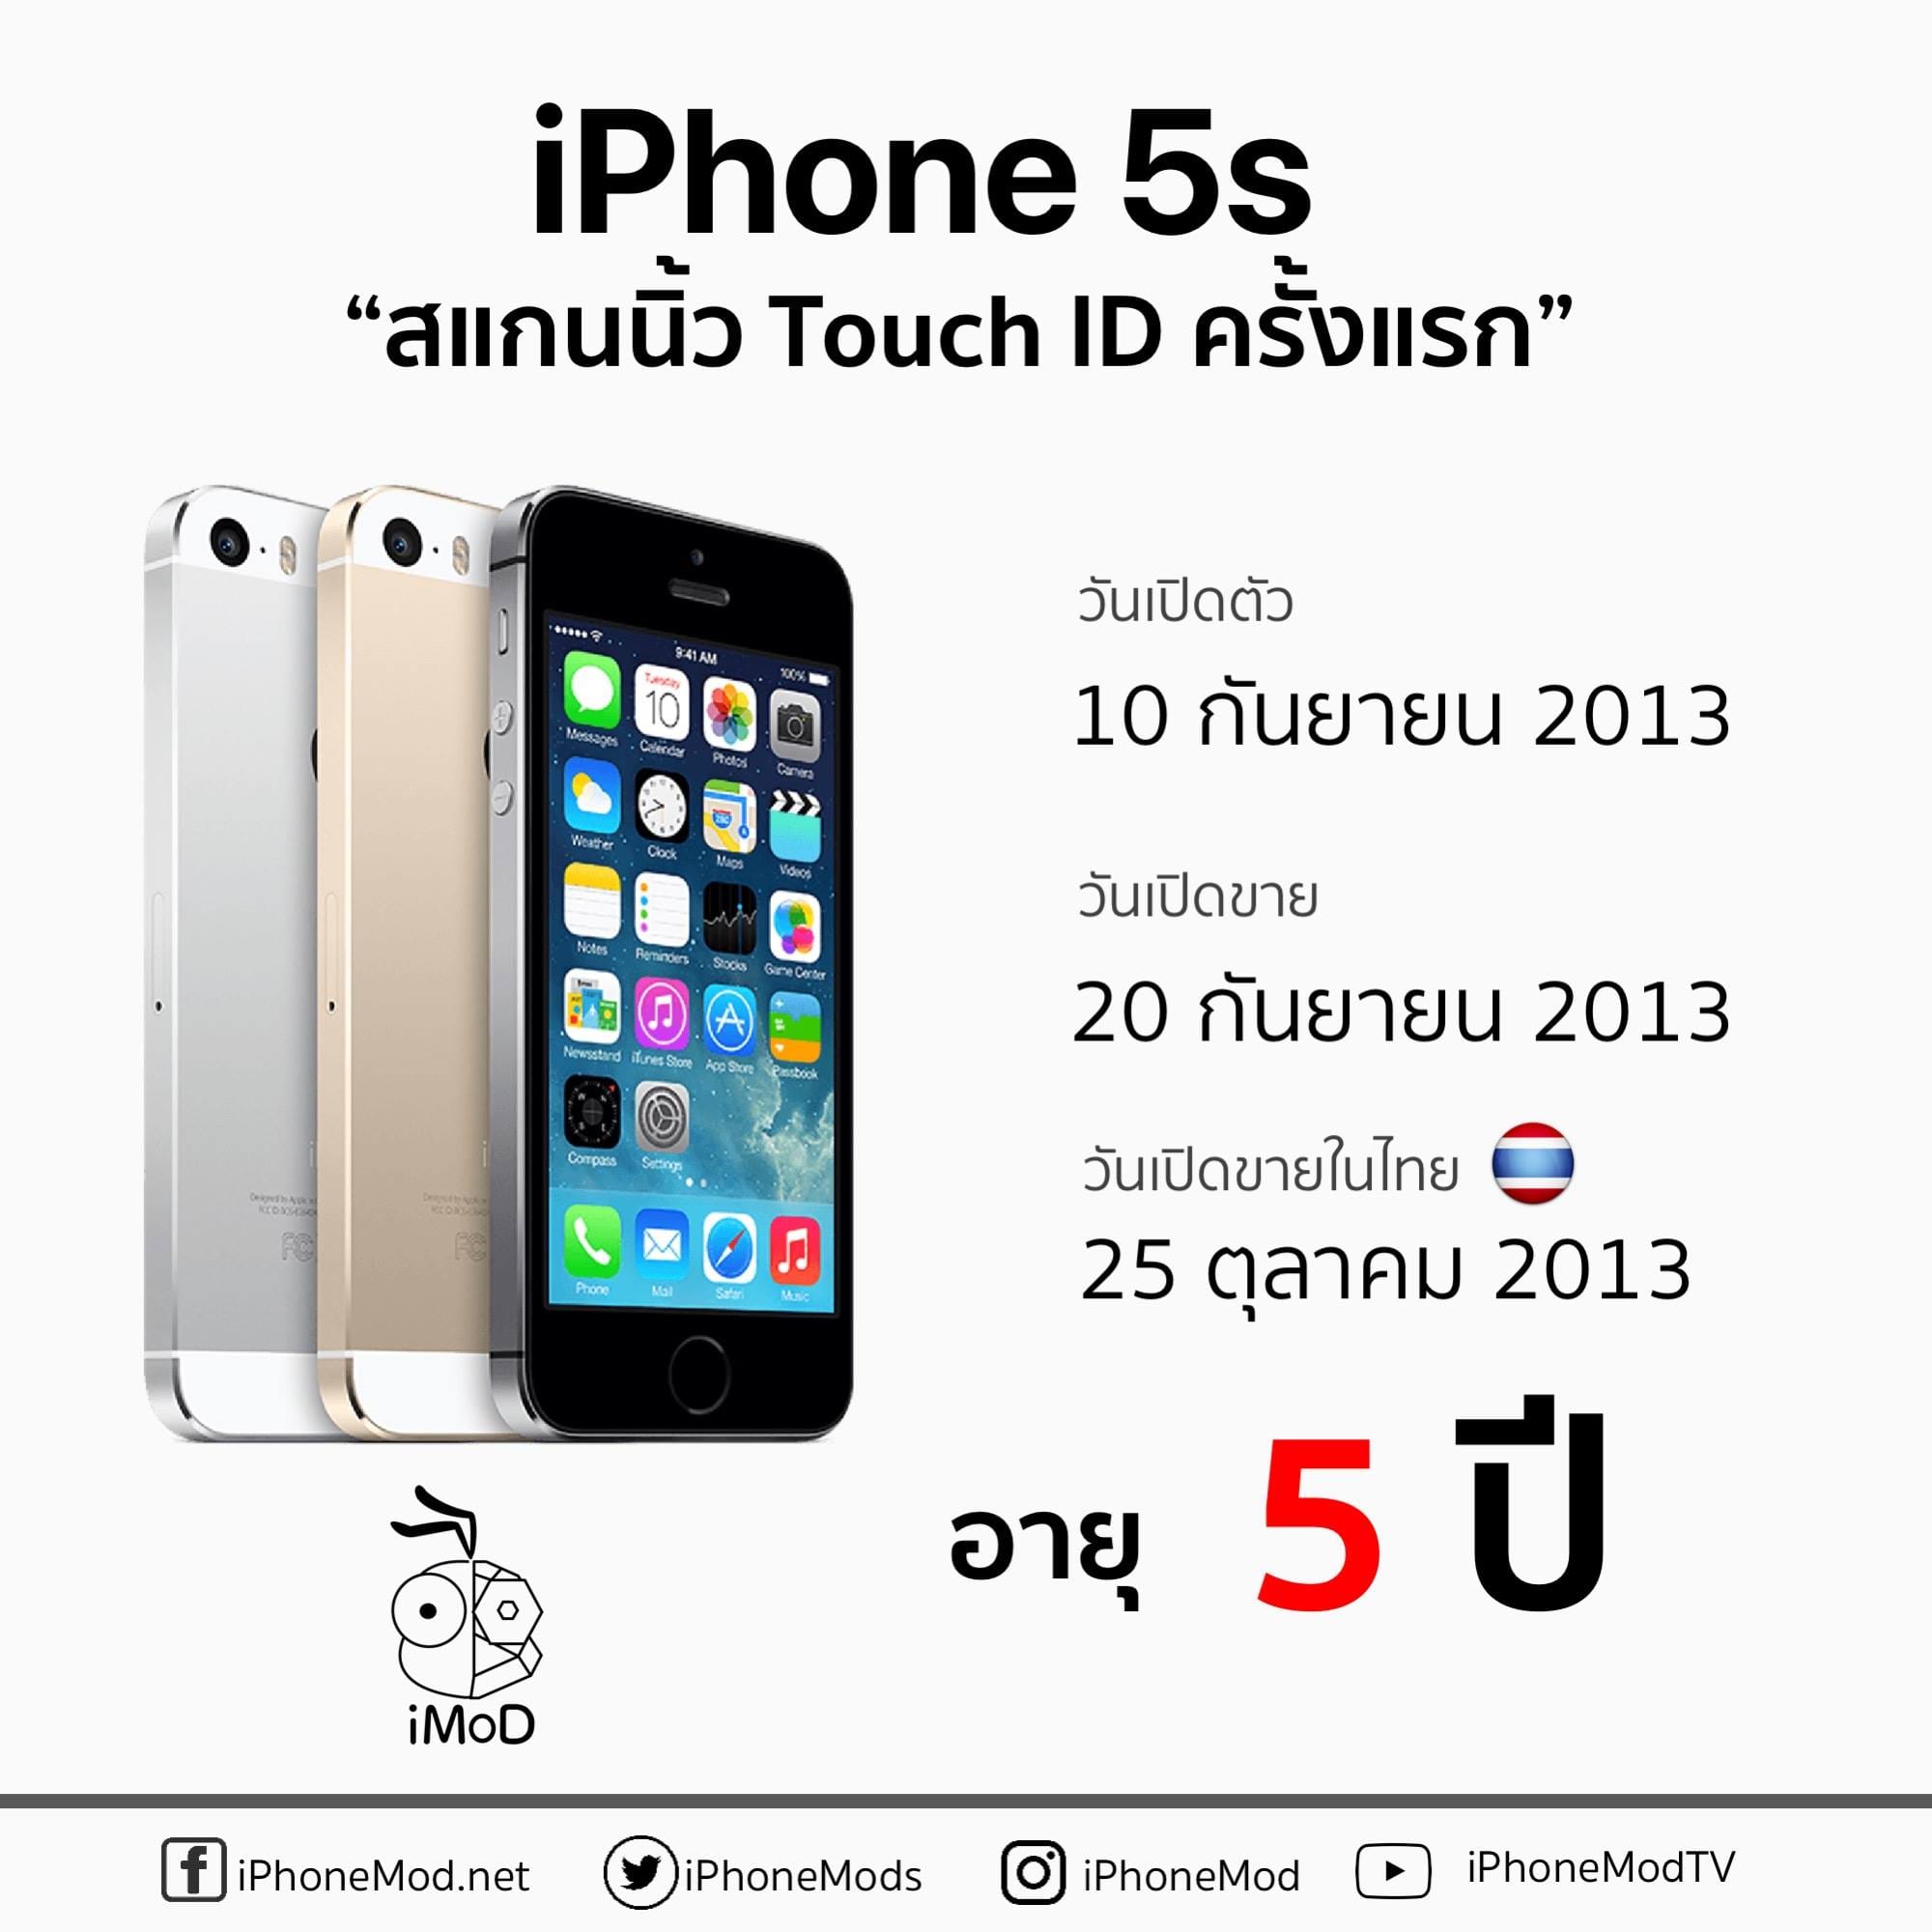 Iphone 5s Launch Thailand